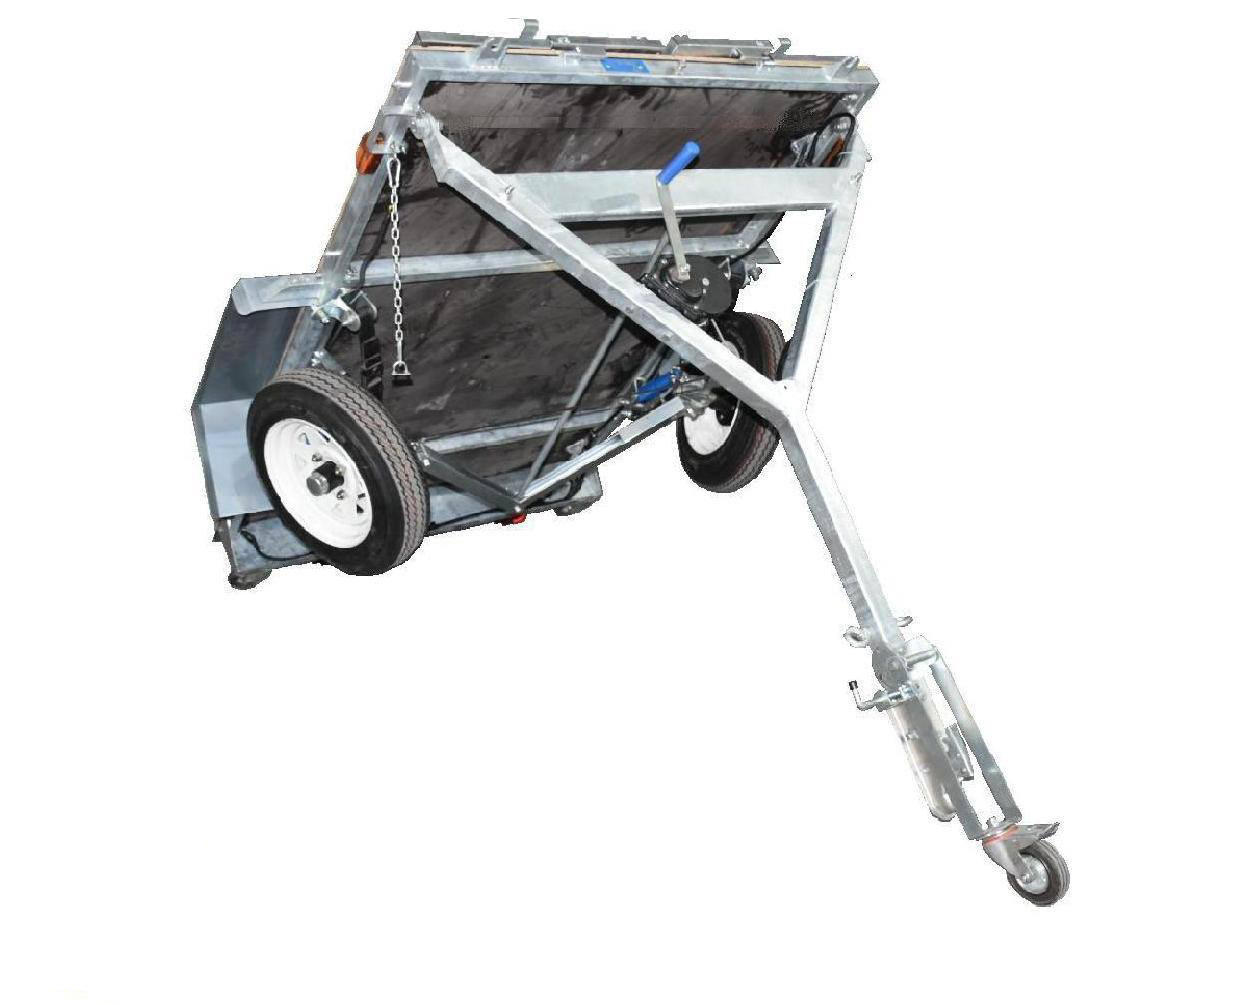 Snowaves Mechanical New folding trailers for business for activities